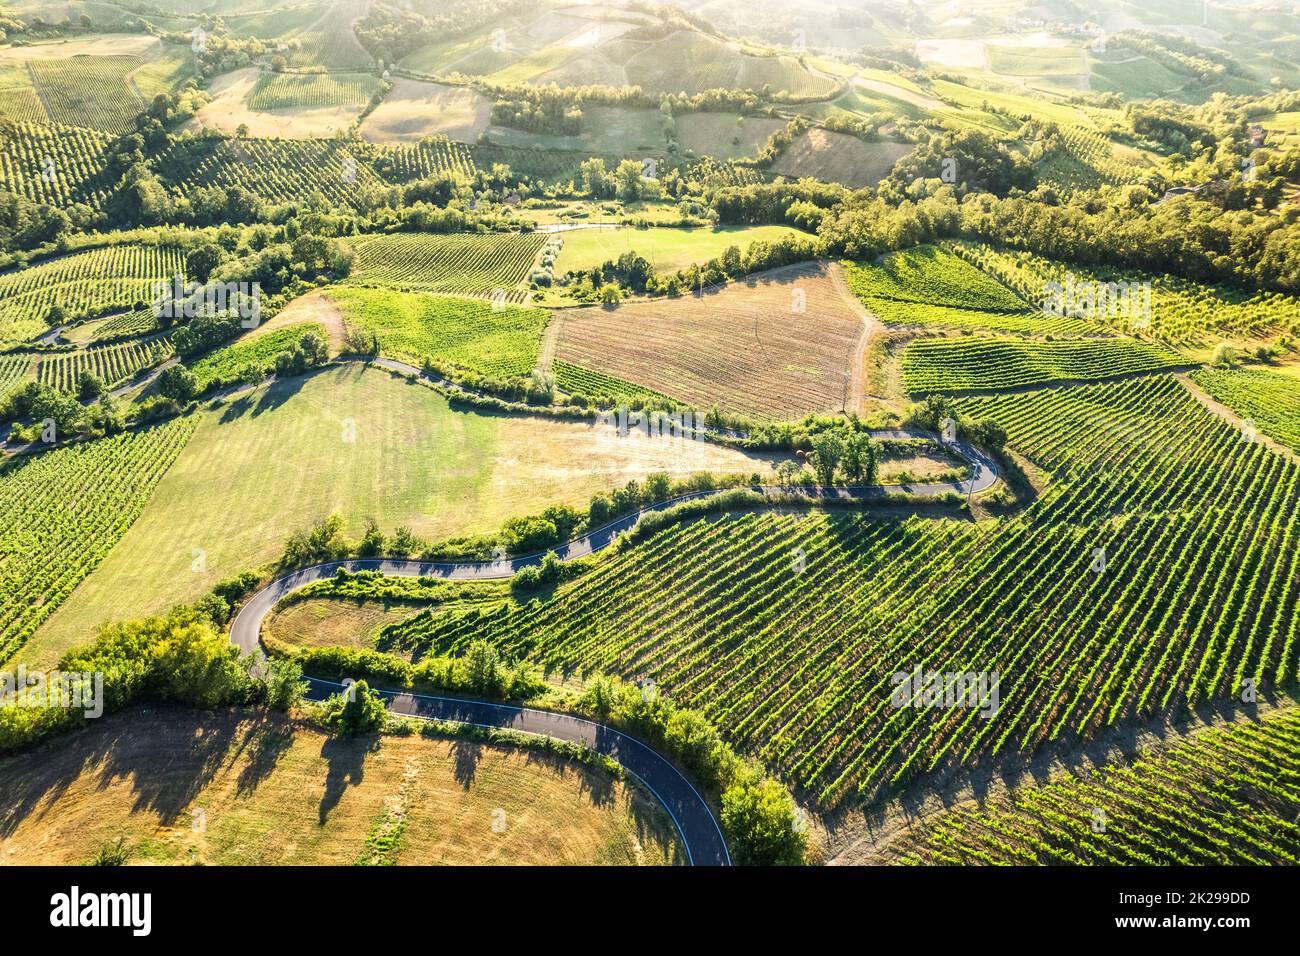 Aerial view of hills in Oltrepo' Pavese covered in vineyards and fields at sunset, Lombardy, Italy Stock Photo